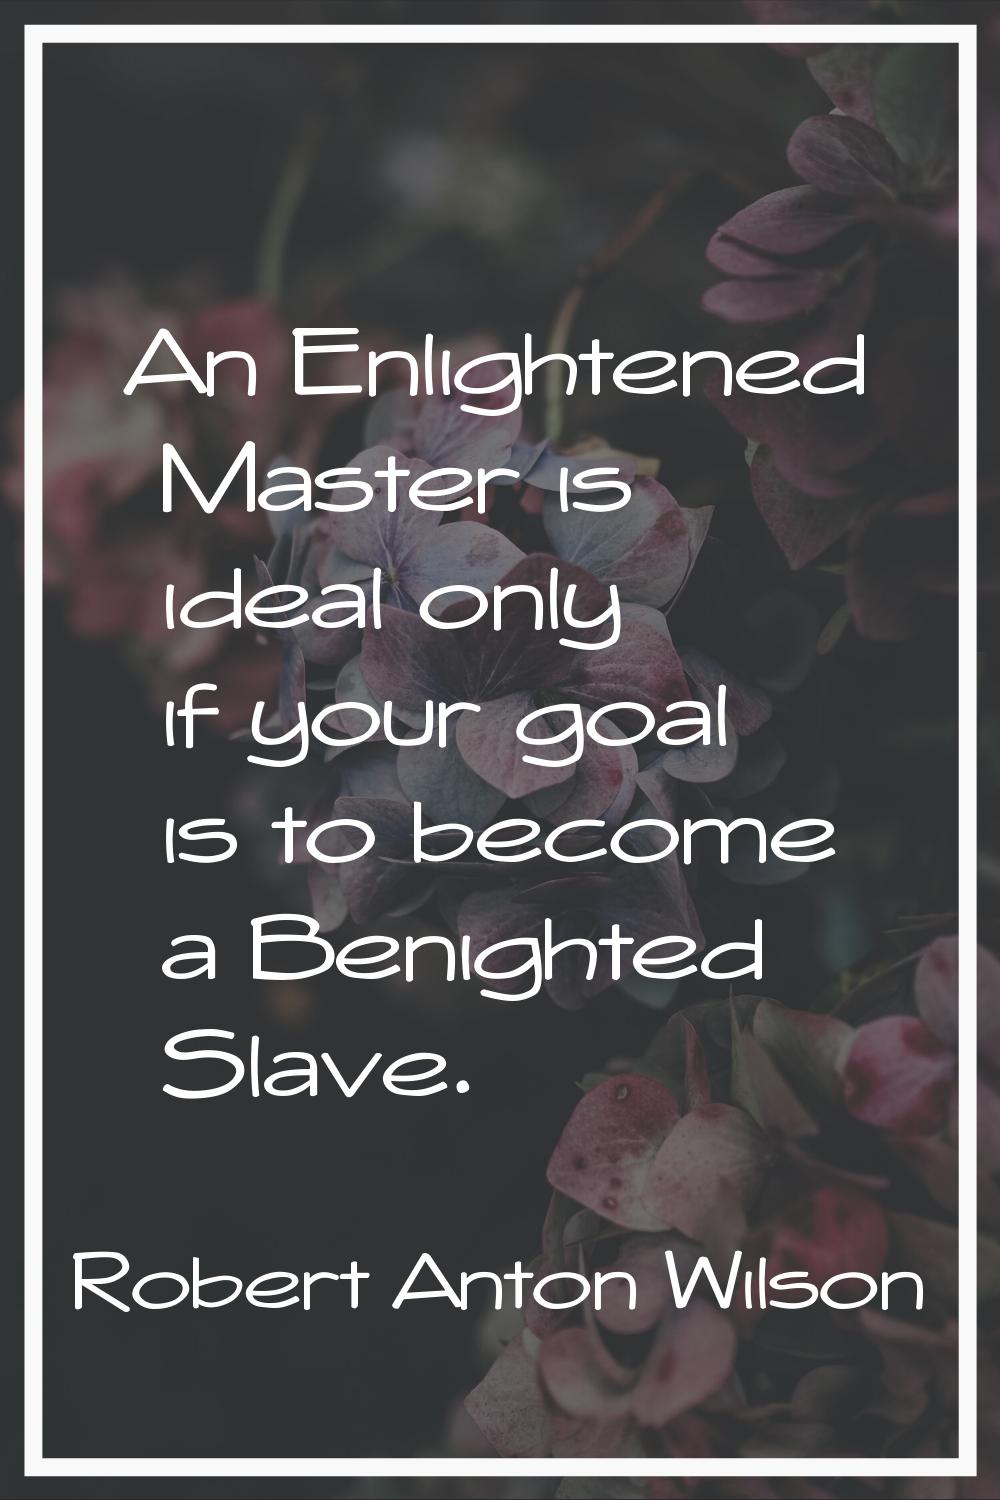 An Enlightened Master is ideal only if your goal is to become a Benighted Slave.